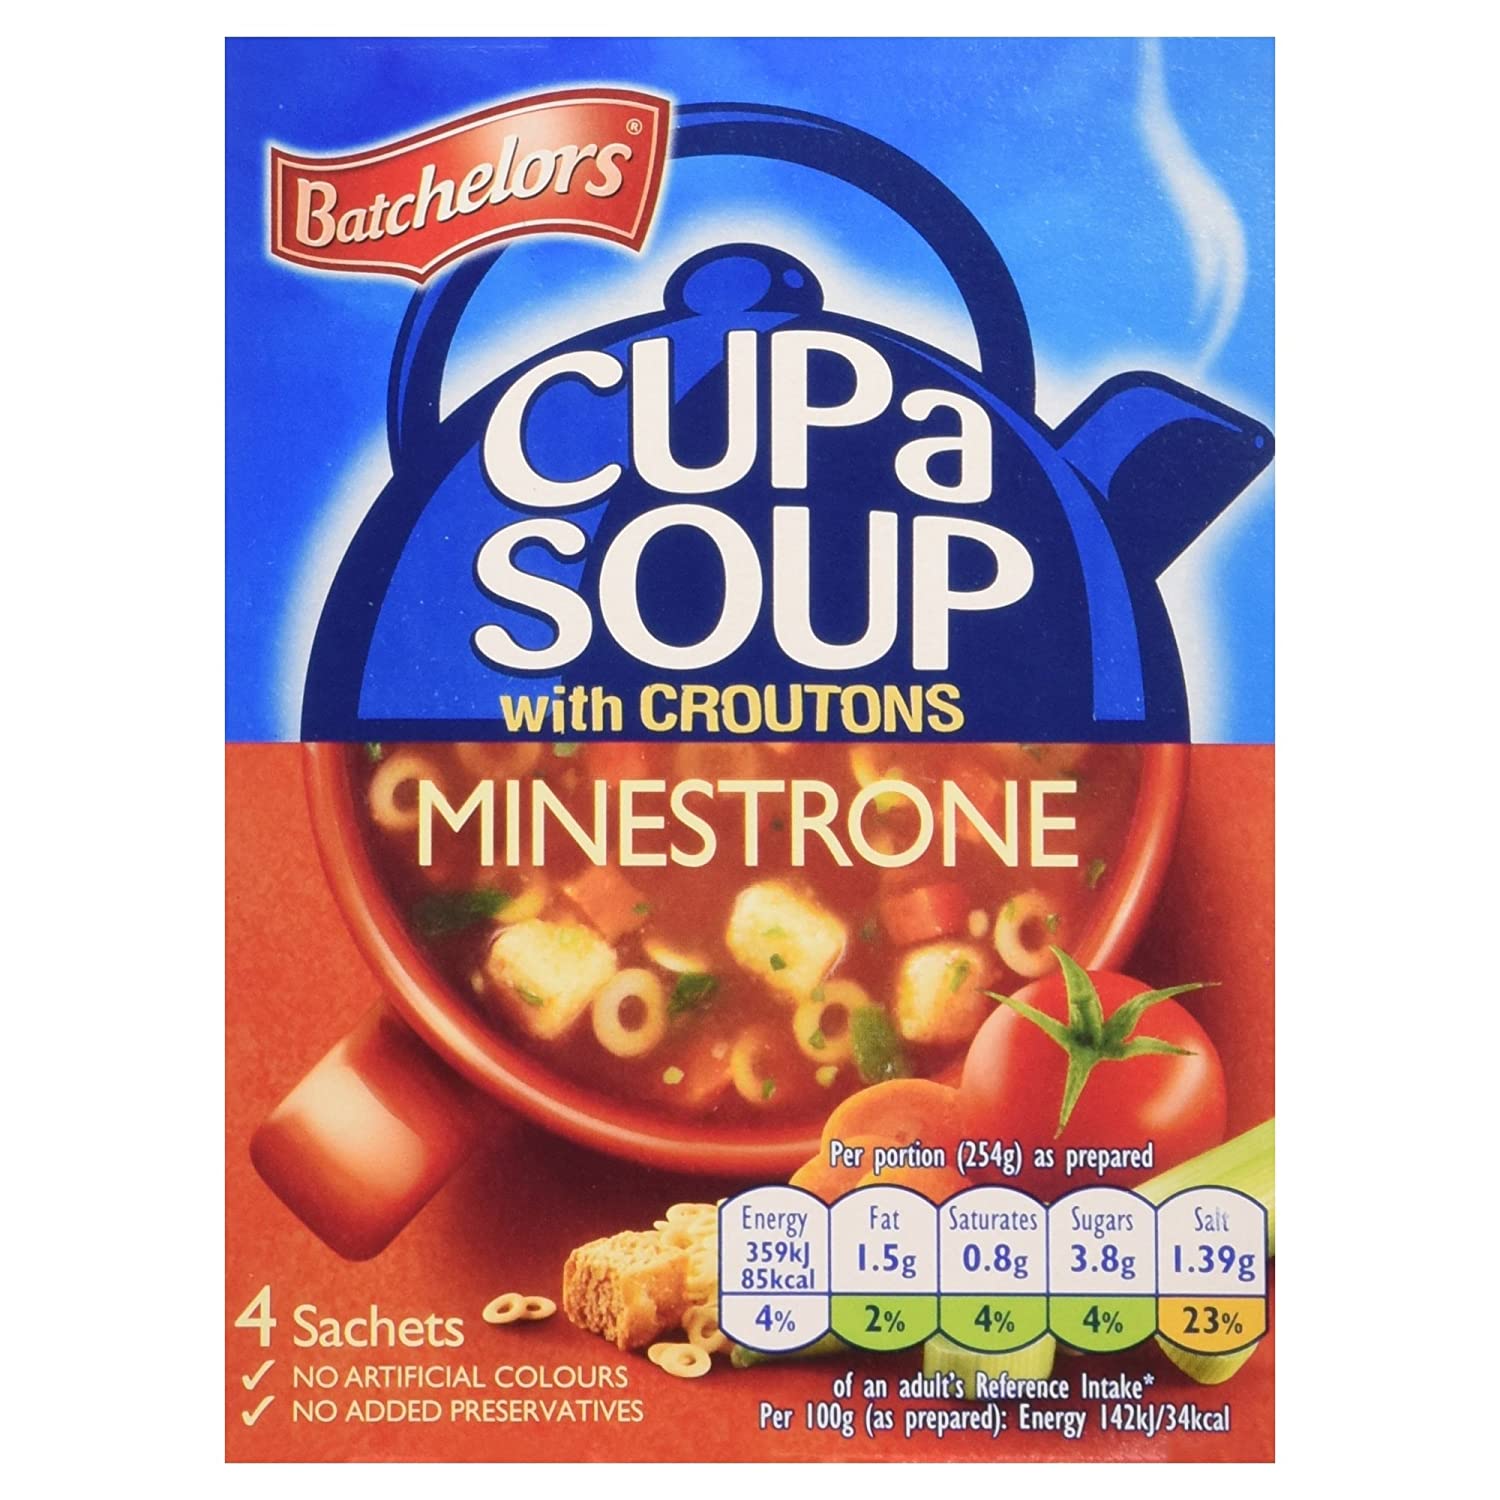 Batchelor's Cup A Soup Minestrone Image